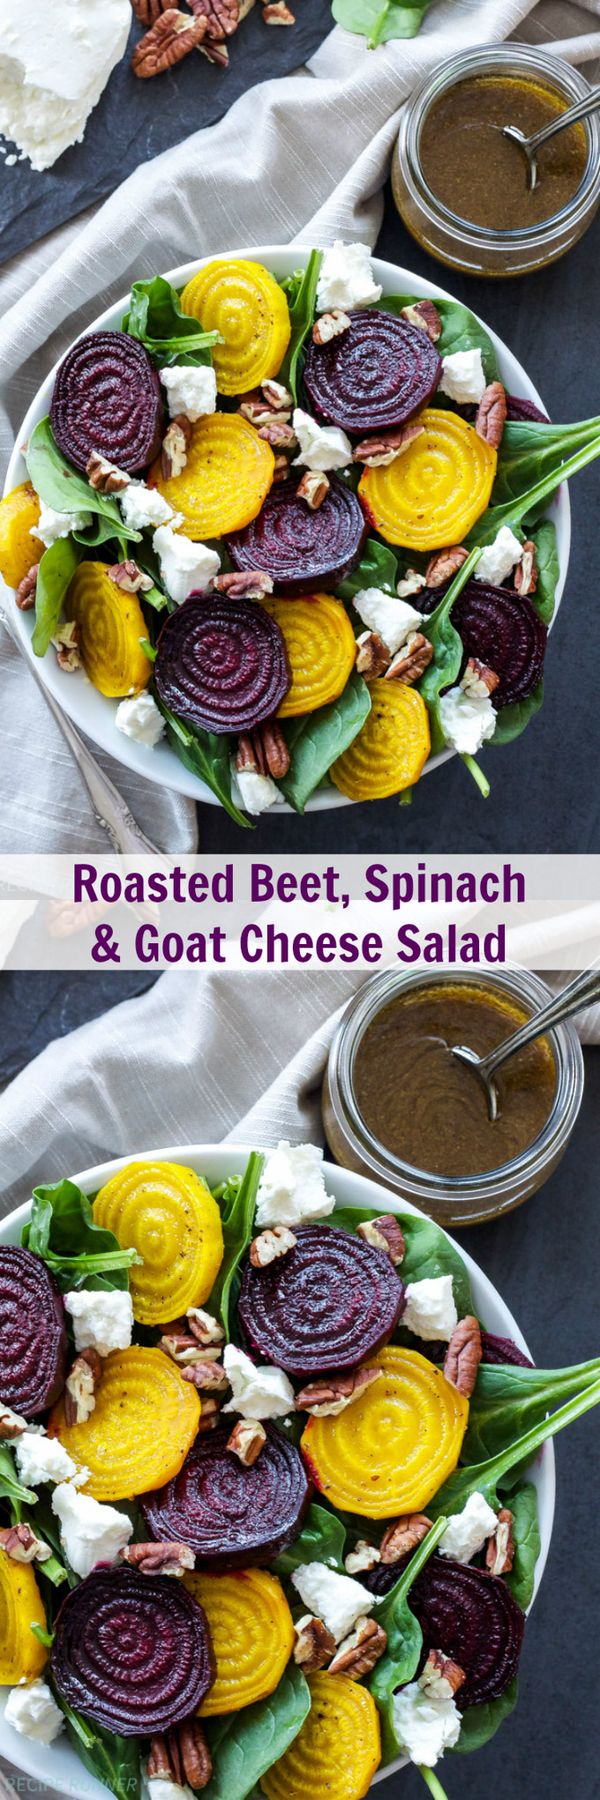 Roasted Beet, Spinach and Goat Cheese Salad